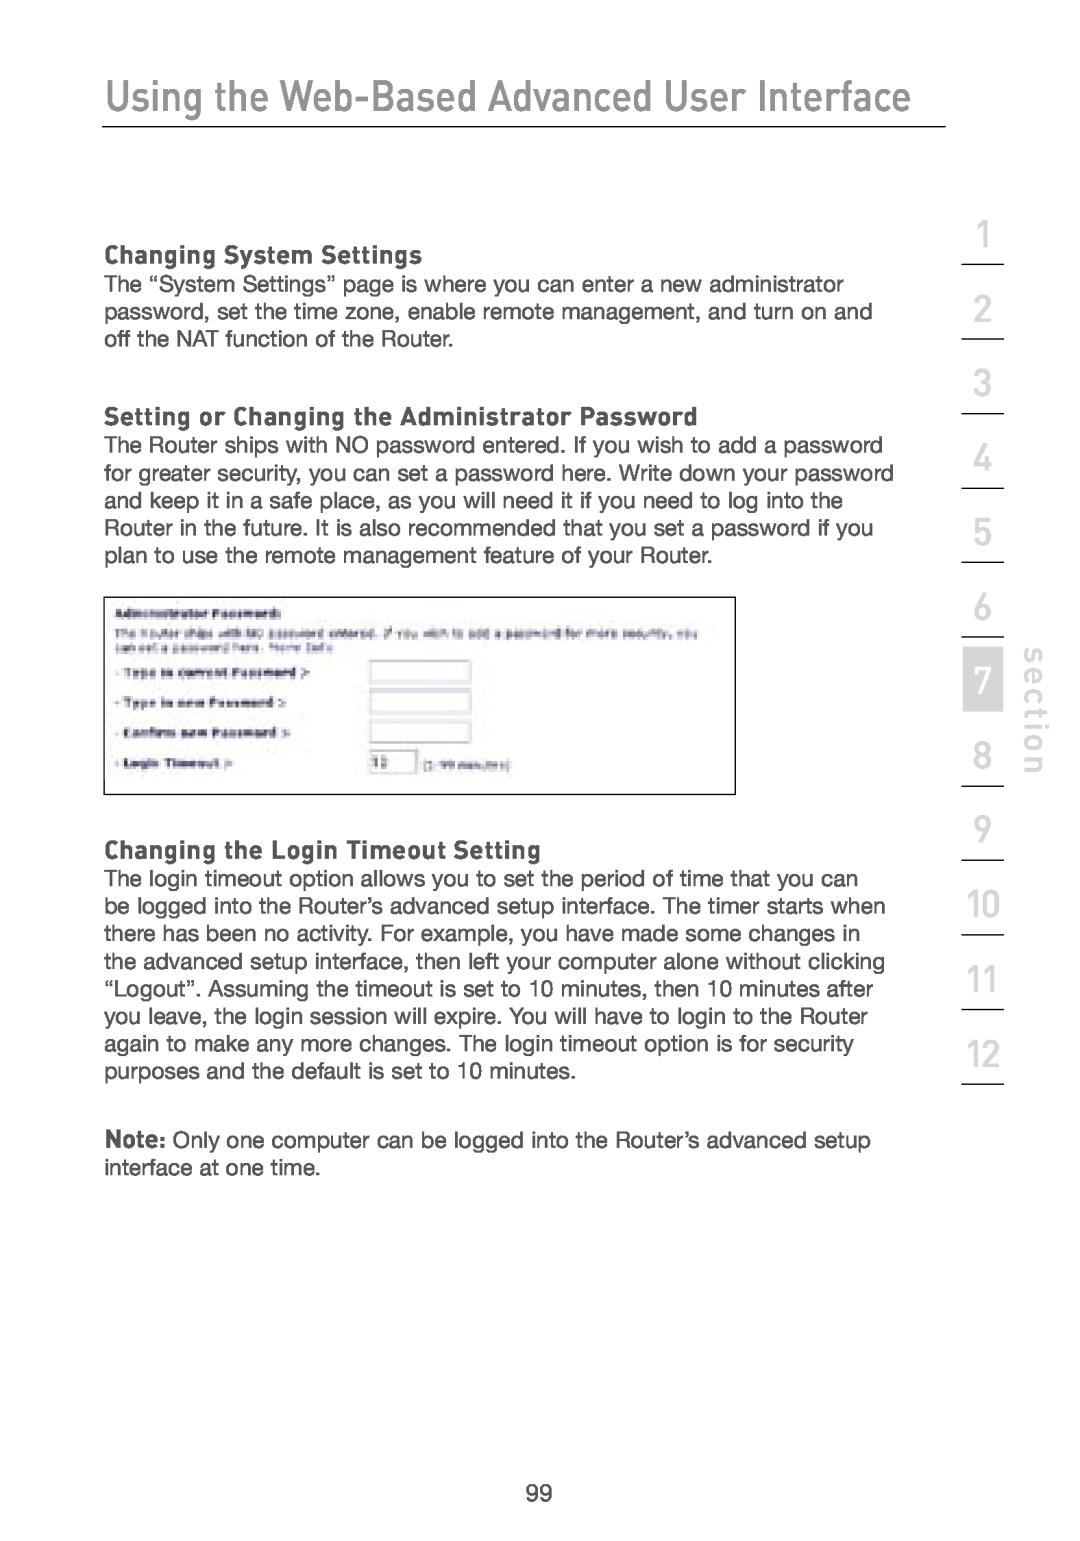 Belkin F5D7230AU4P user manual Changing System Settings, Setting or Changing the Administrator Password, section 